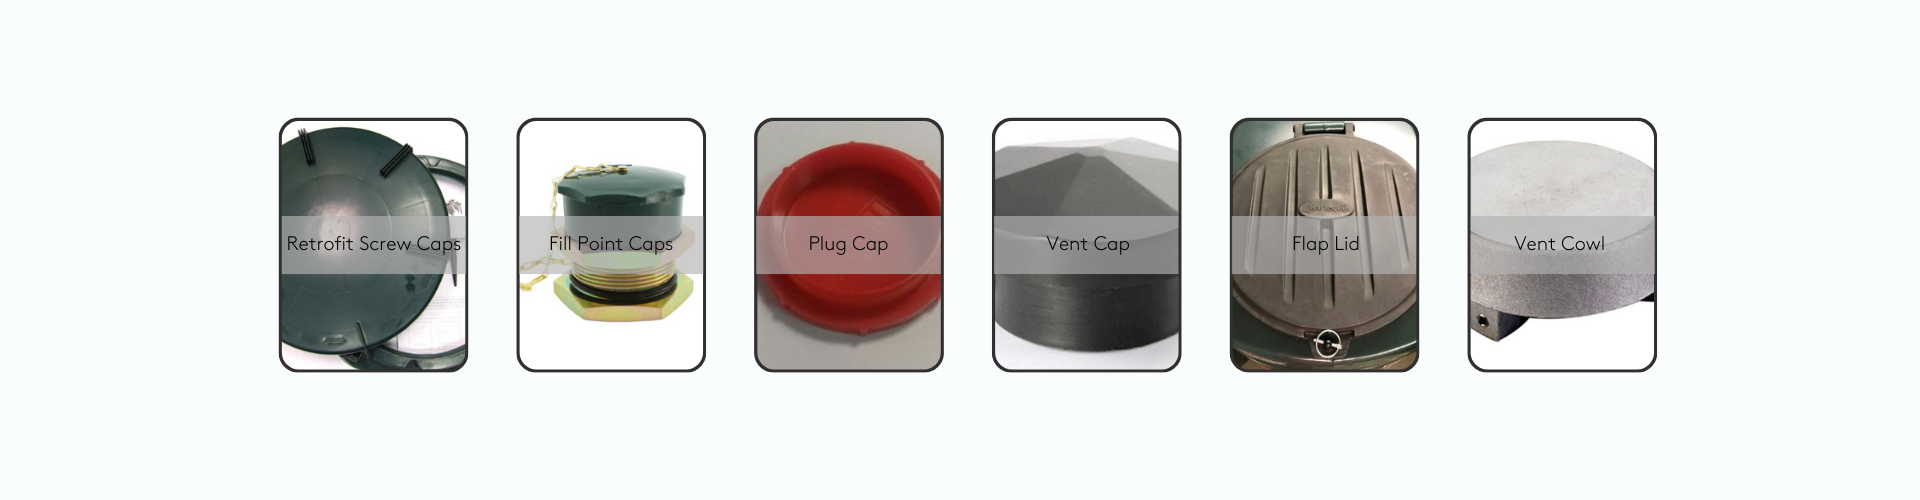 tank-lid-and-caps-2